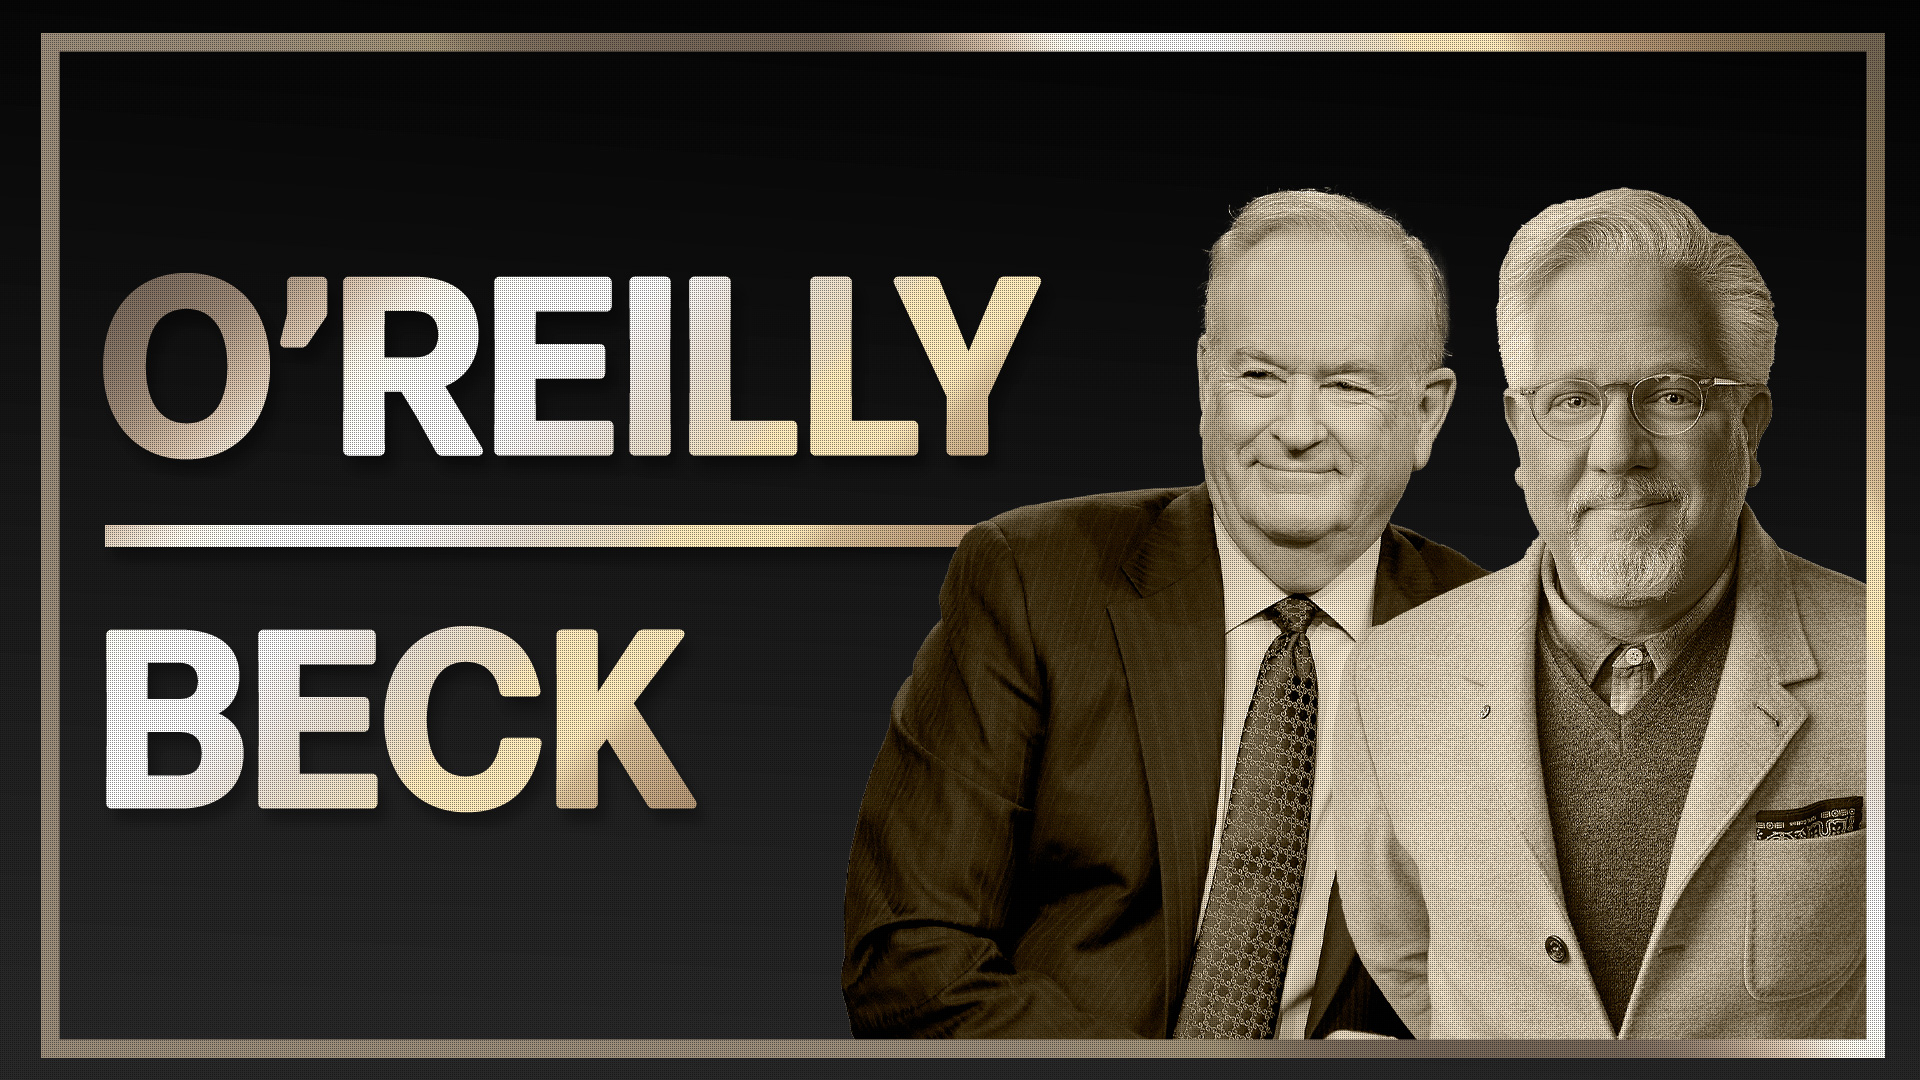 O'Reilly & Beck on Tucker Carlson, the Reaction, and His Future